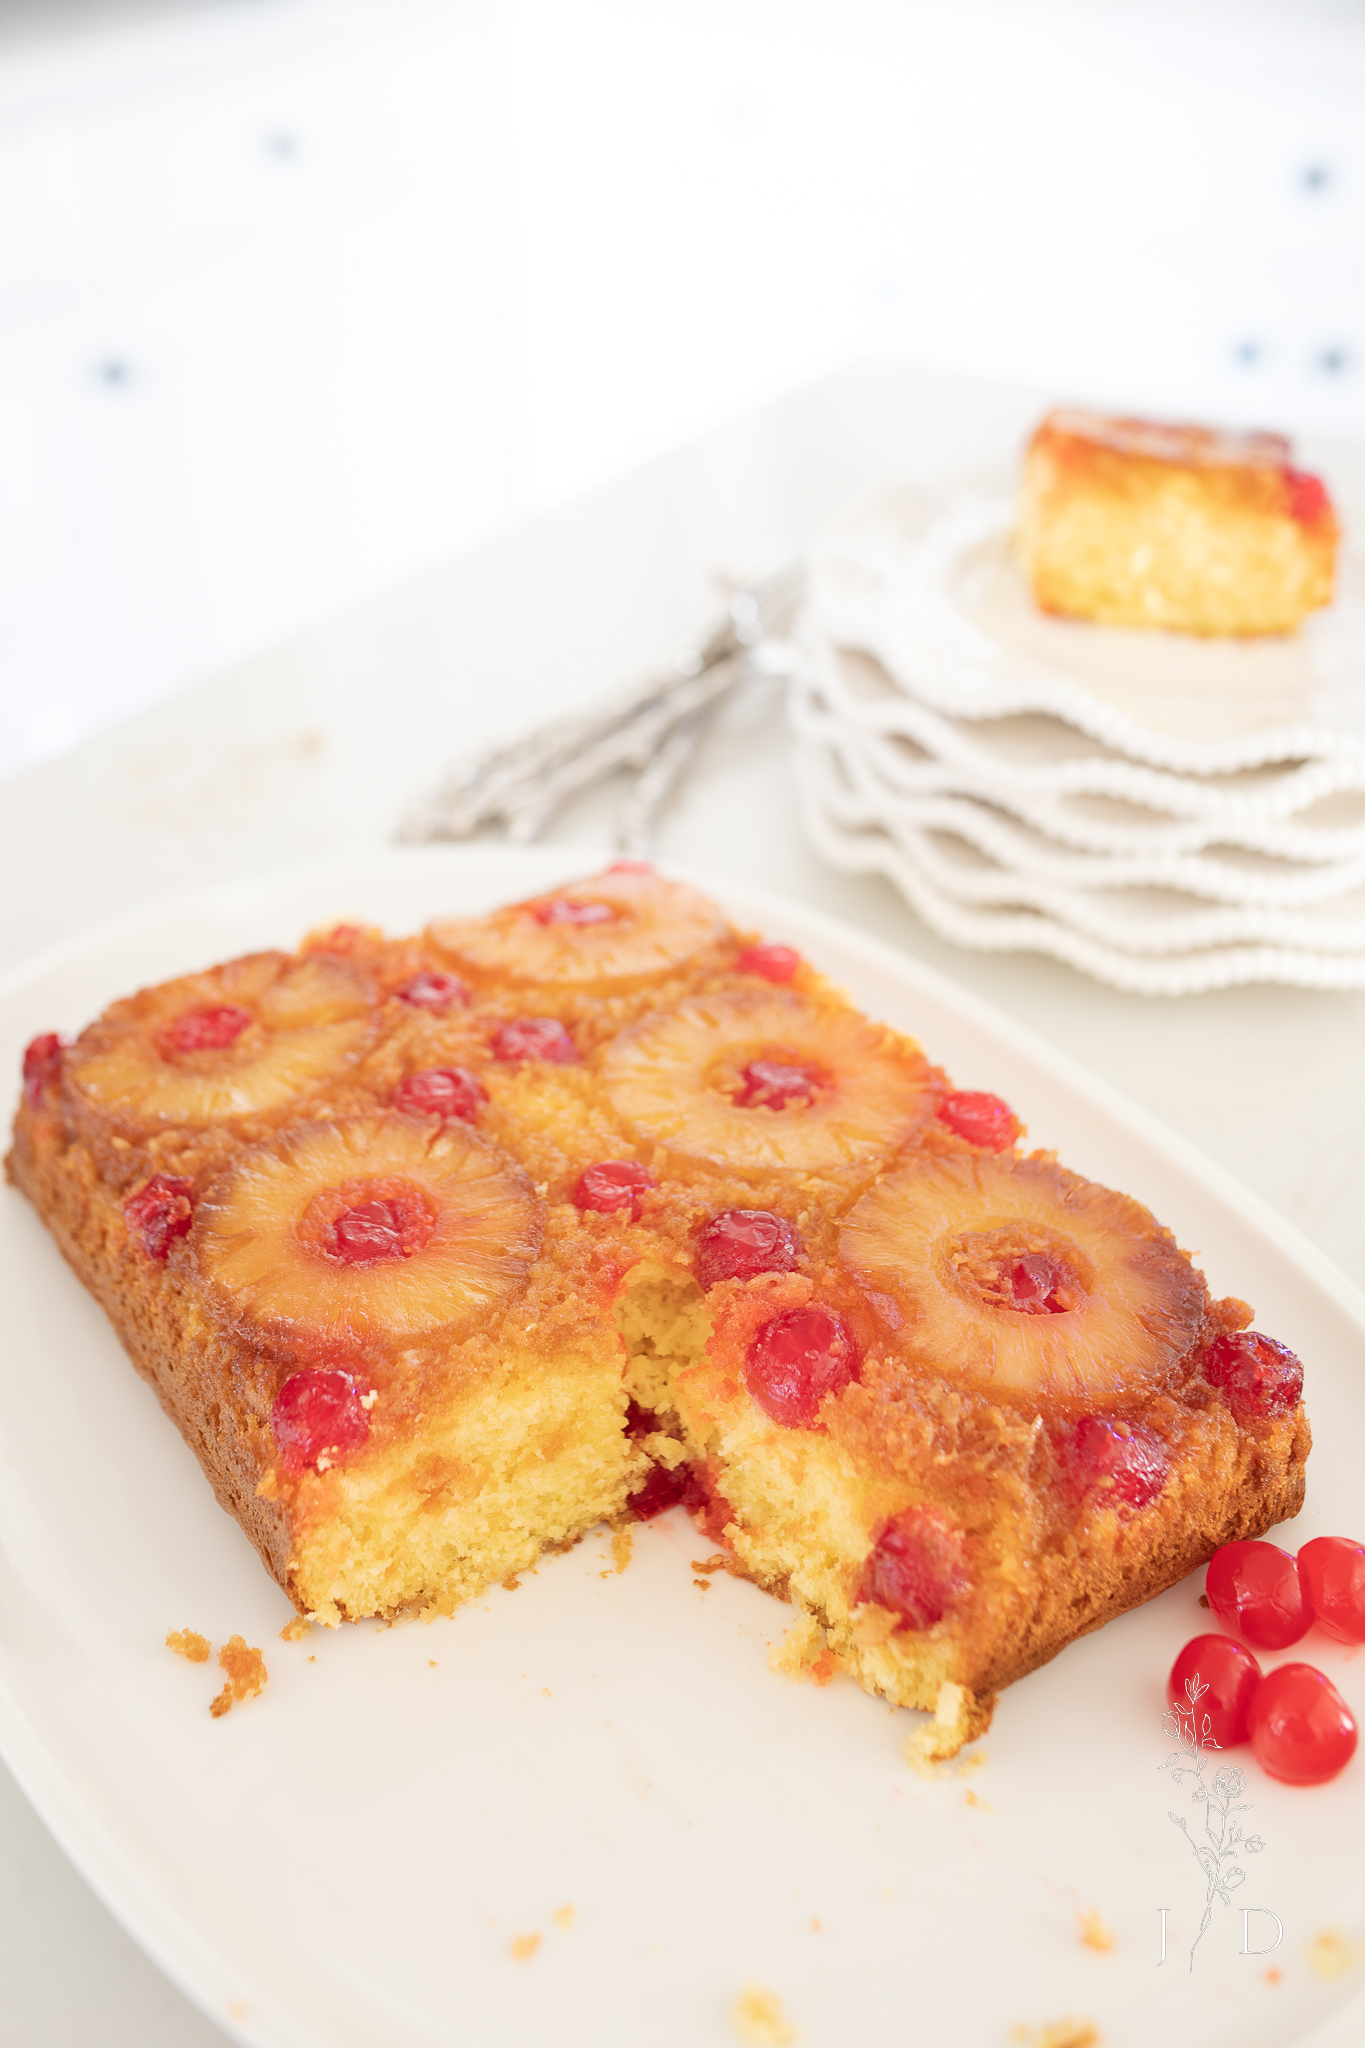 Shot of a pineapple upside down cake with a piece missing from the corner